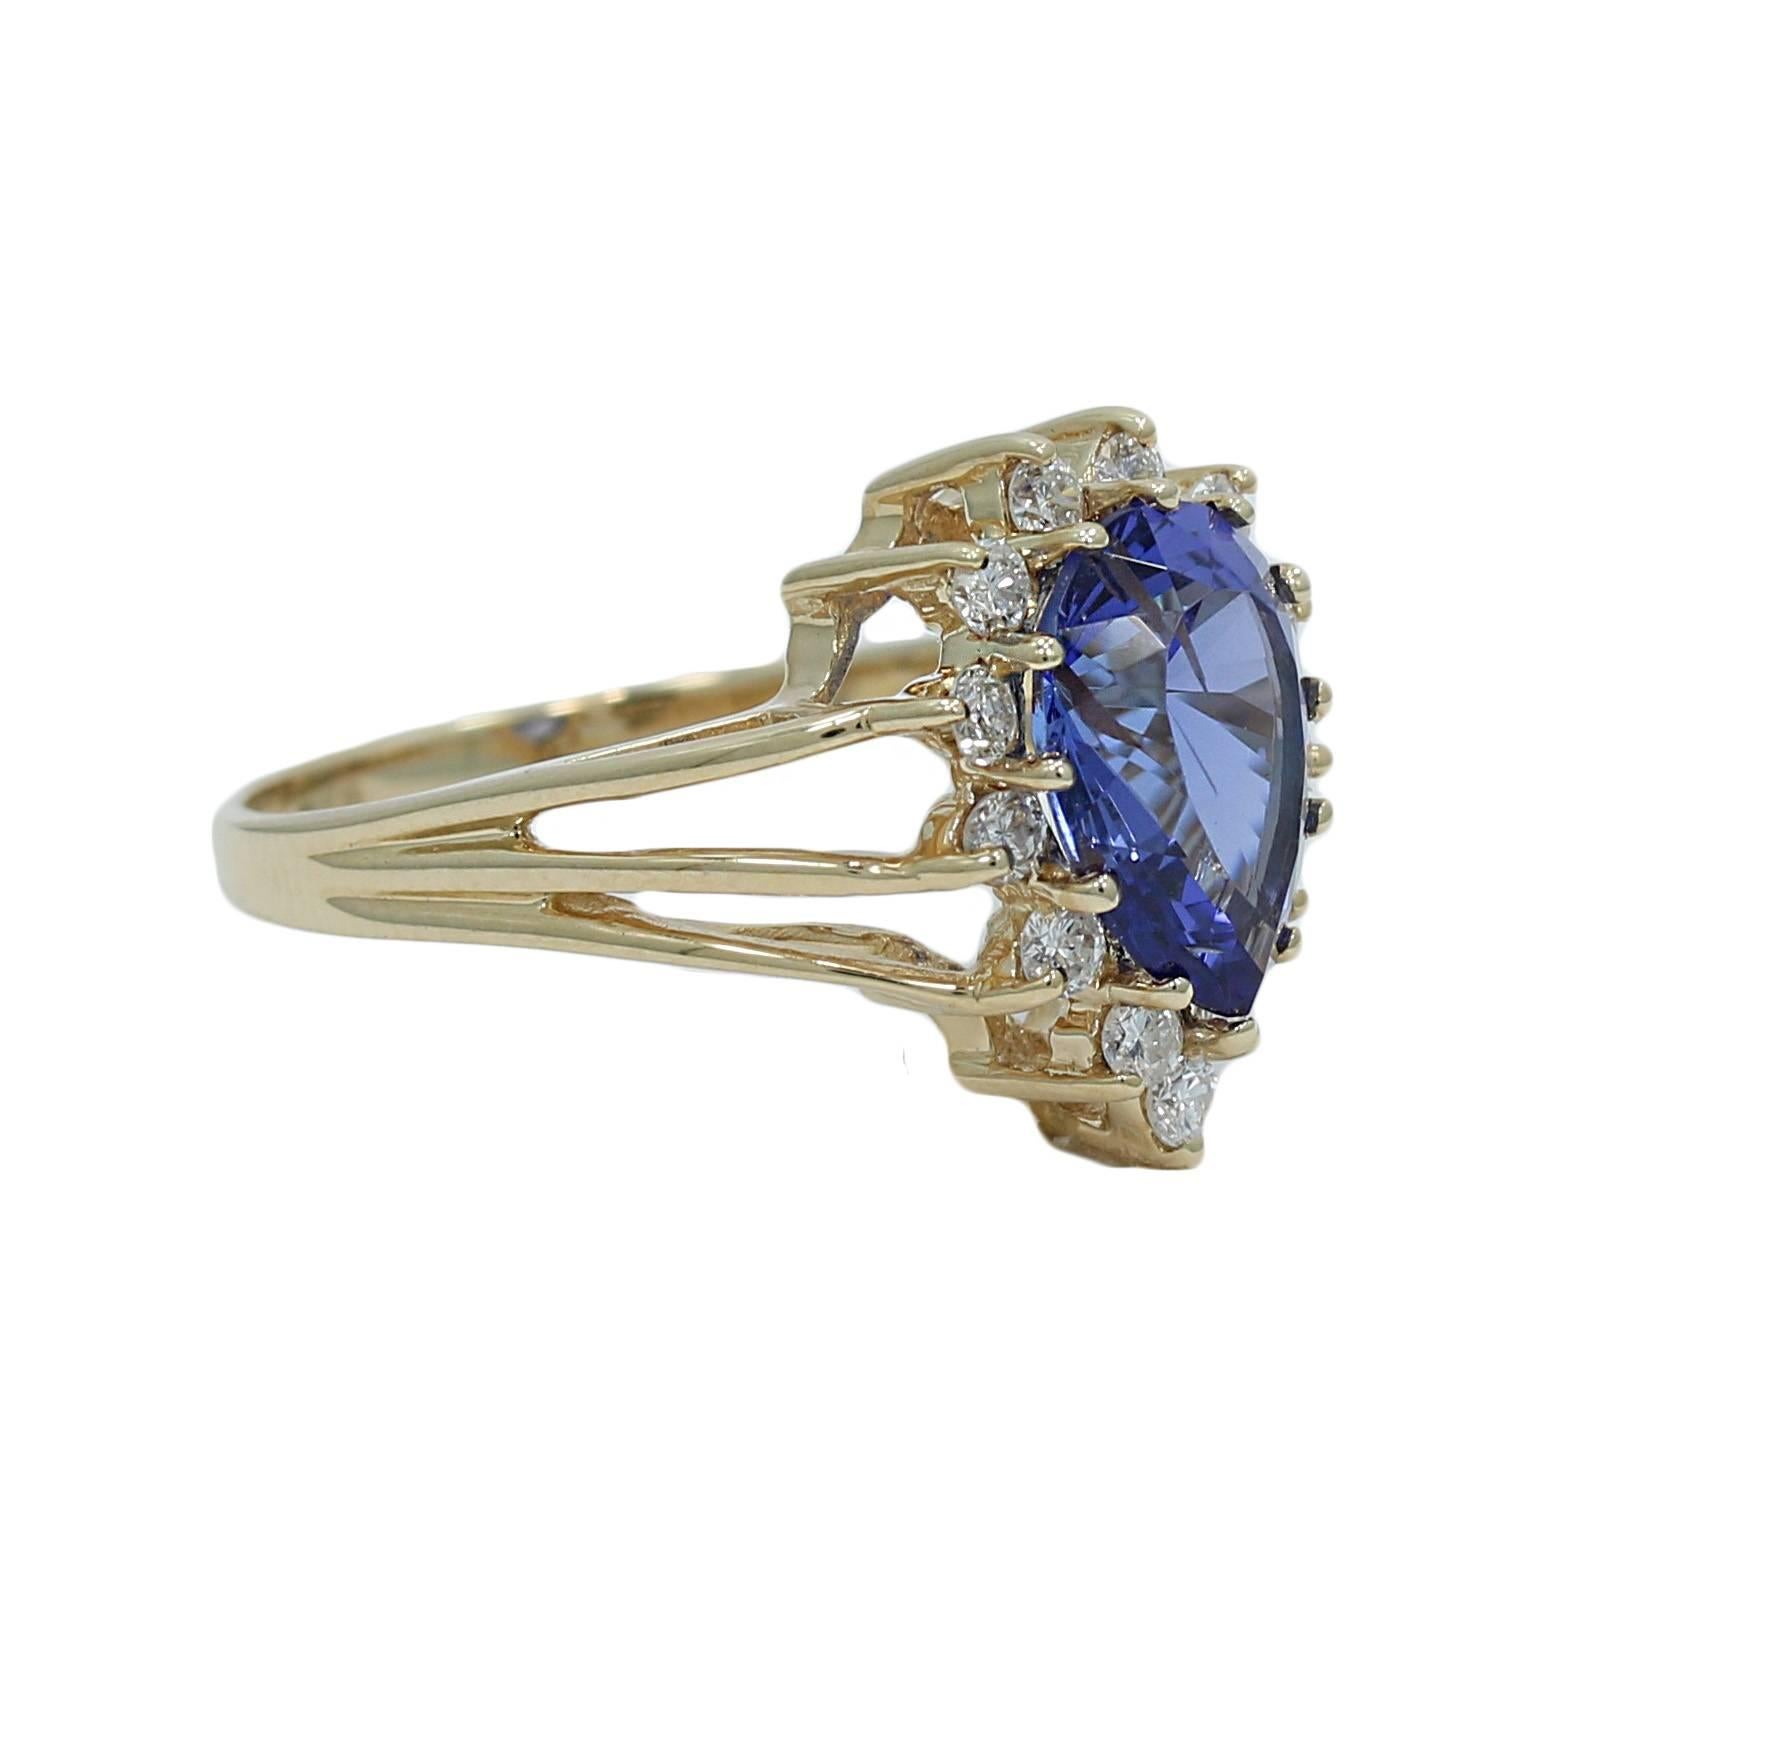 We have this 14k yellow gold pear shaped tanzanite and diamond ring. It has thirteen (13) diamonds H-I, SI-I weighing approximately .45 carats total weight and one (1) pear shaped tanzanite weighing approximately 2.00 carats. It measures 0.625"